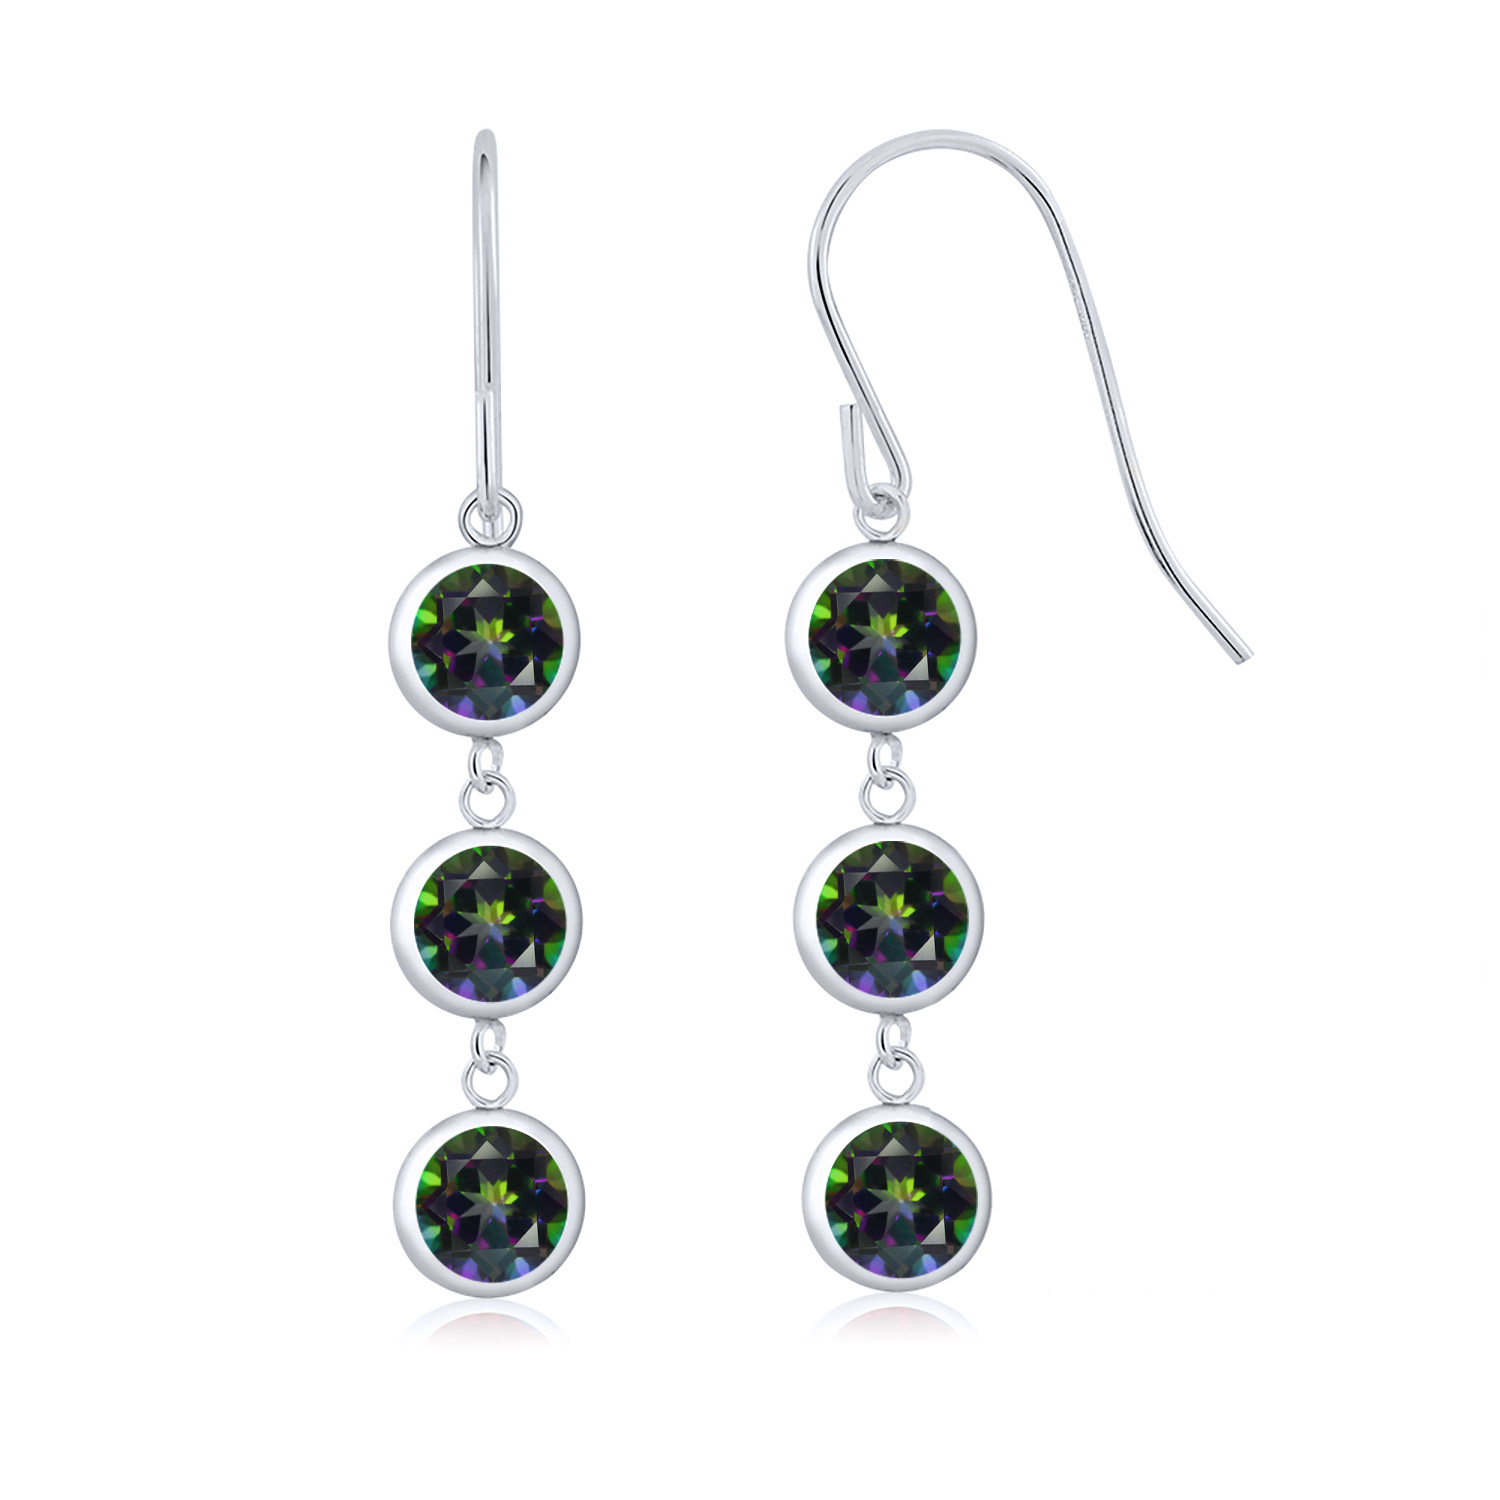 Gem Stone King 925 Sterling Silver Green Mystic Topaz 3 Stone French Wire Dangle Earrings For Women (3.30 Cttw, Gemstone Birthstone, Round 5MM)